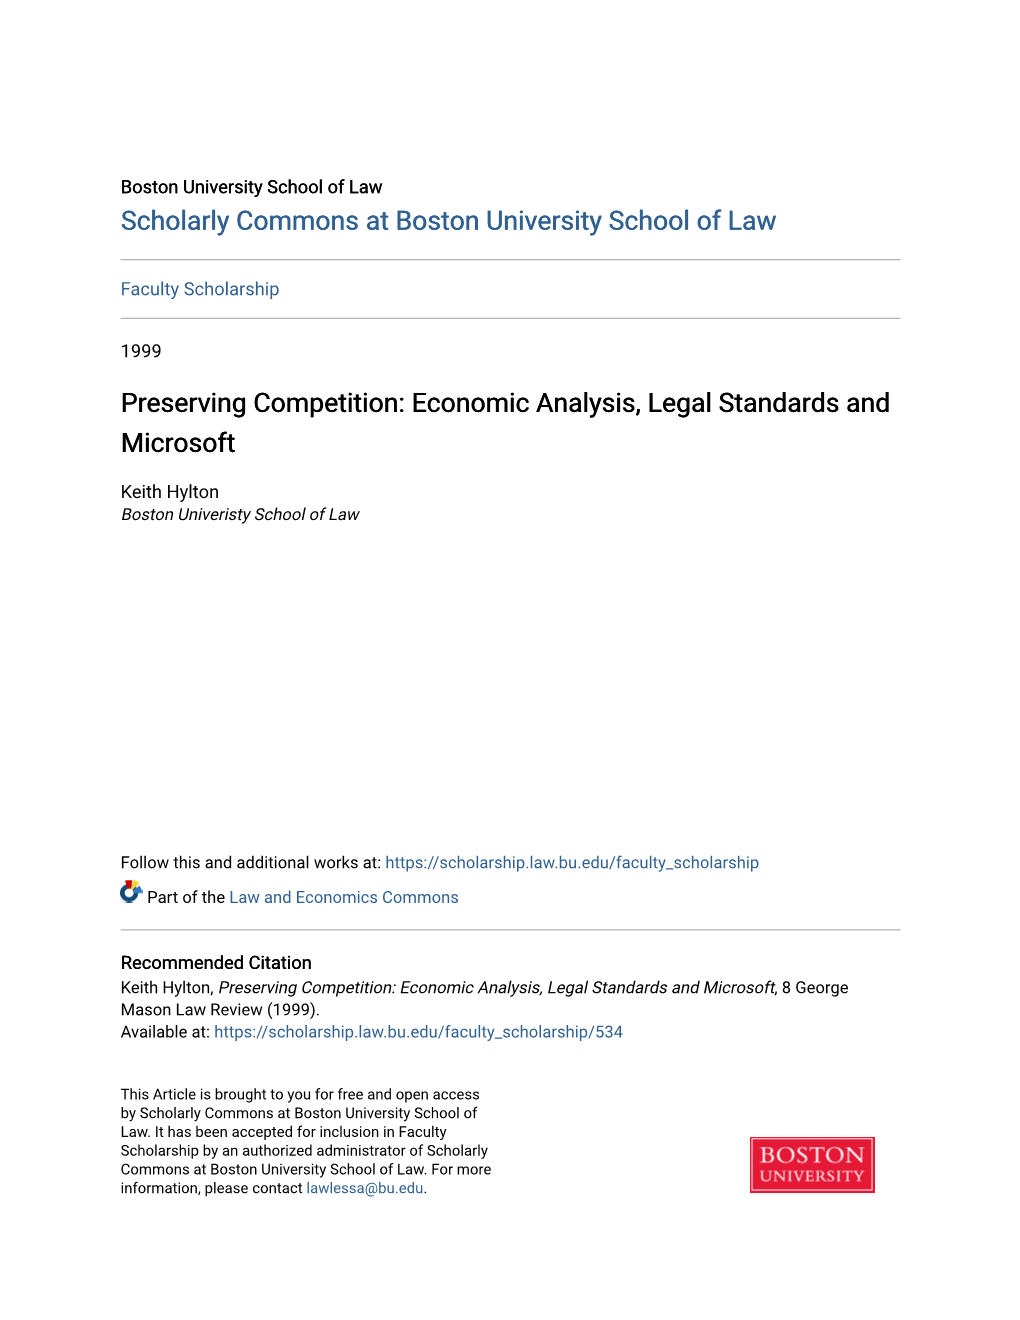 Economic Analysis, Legal Standards and Microsoft